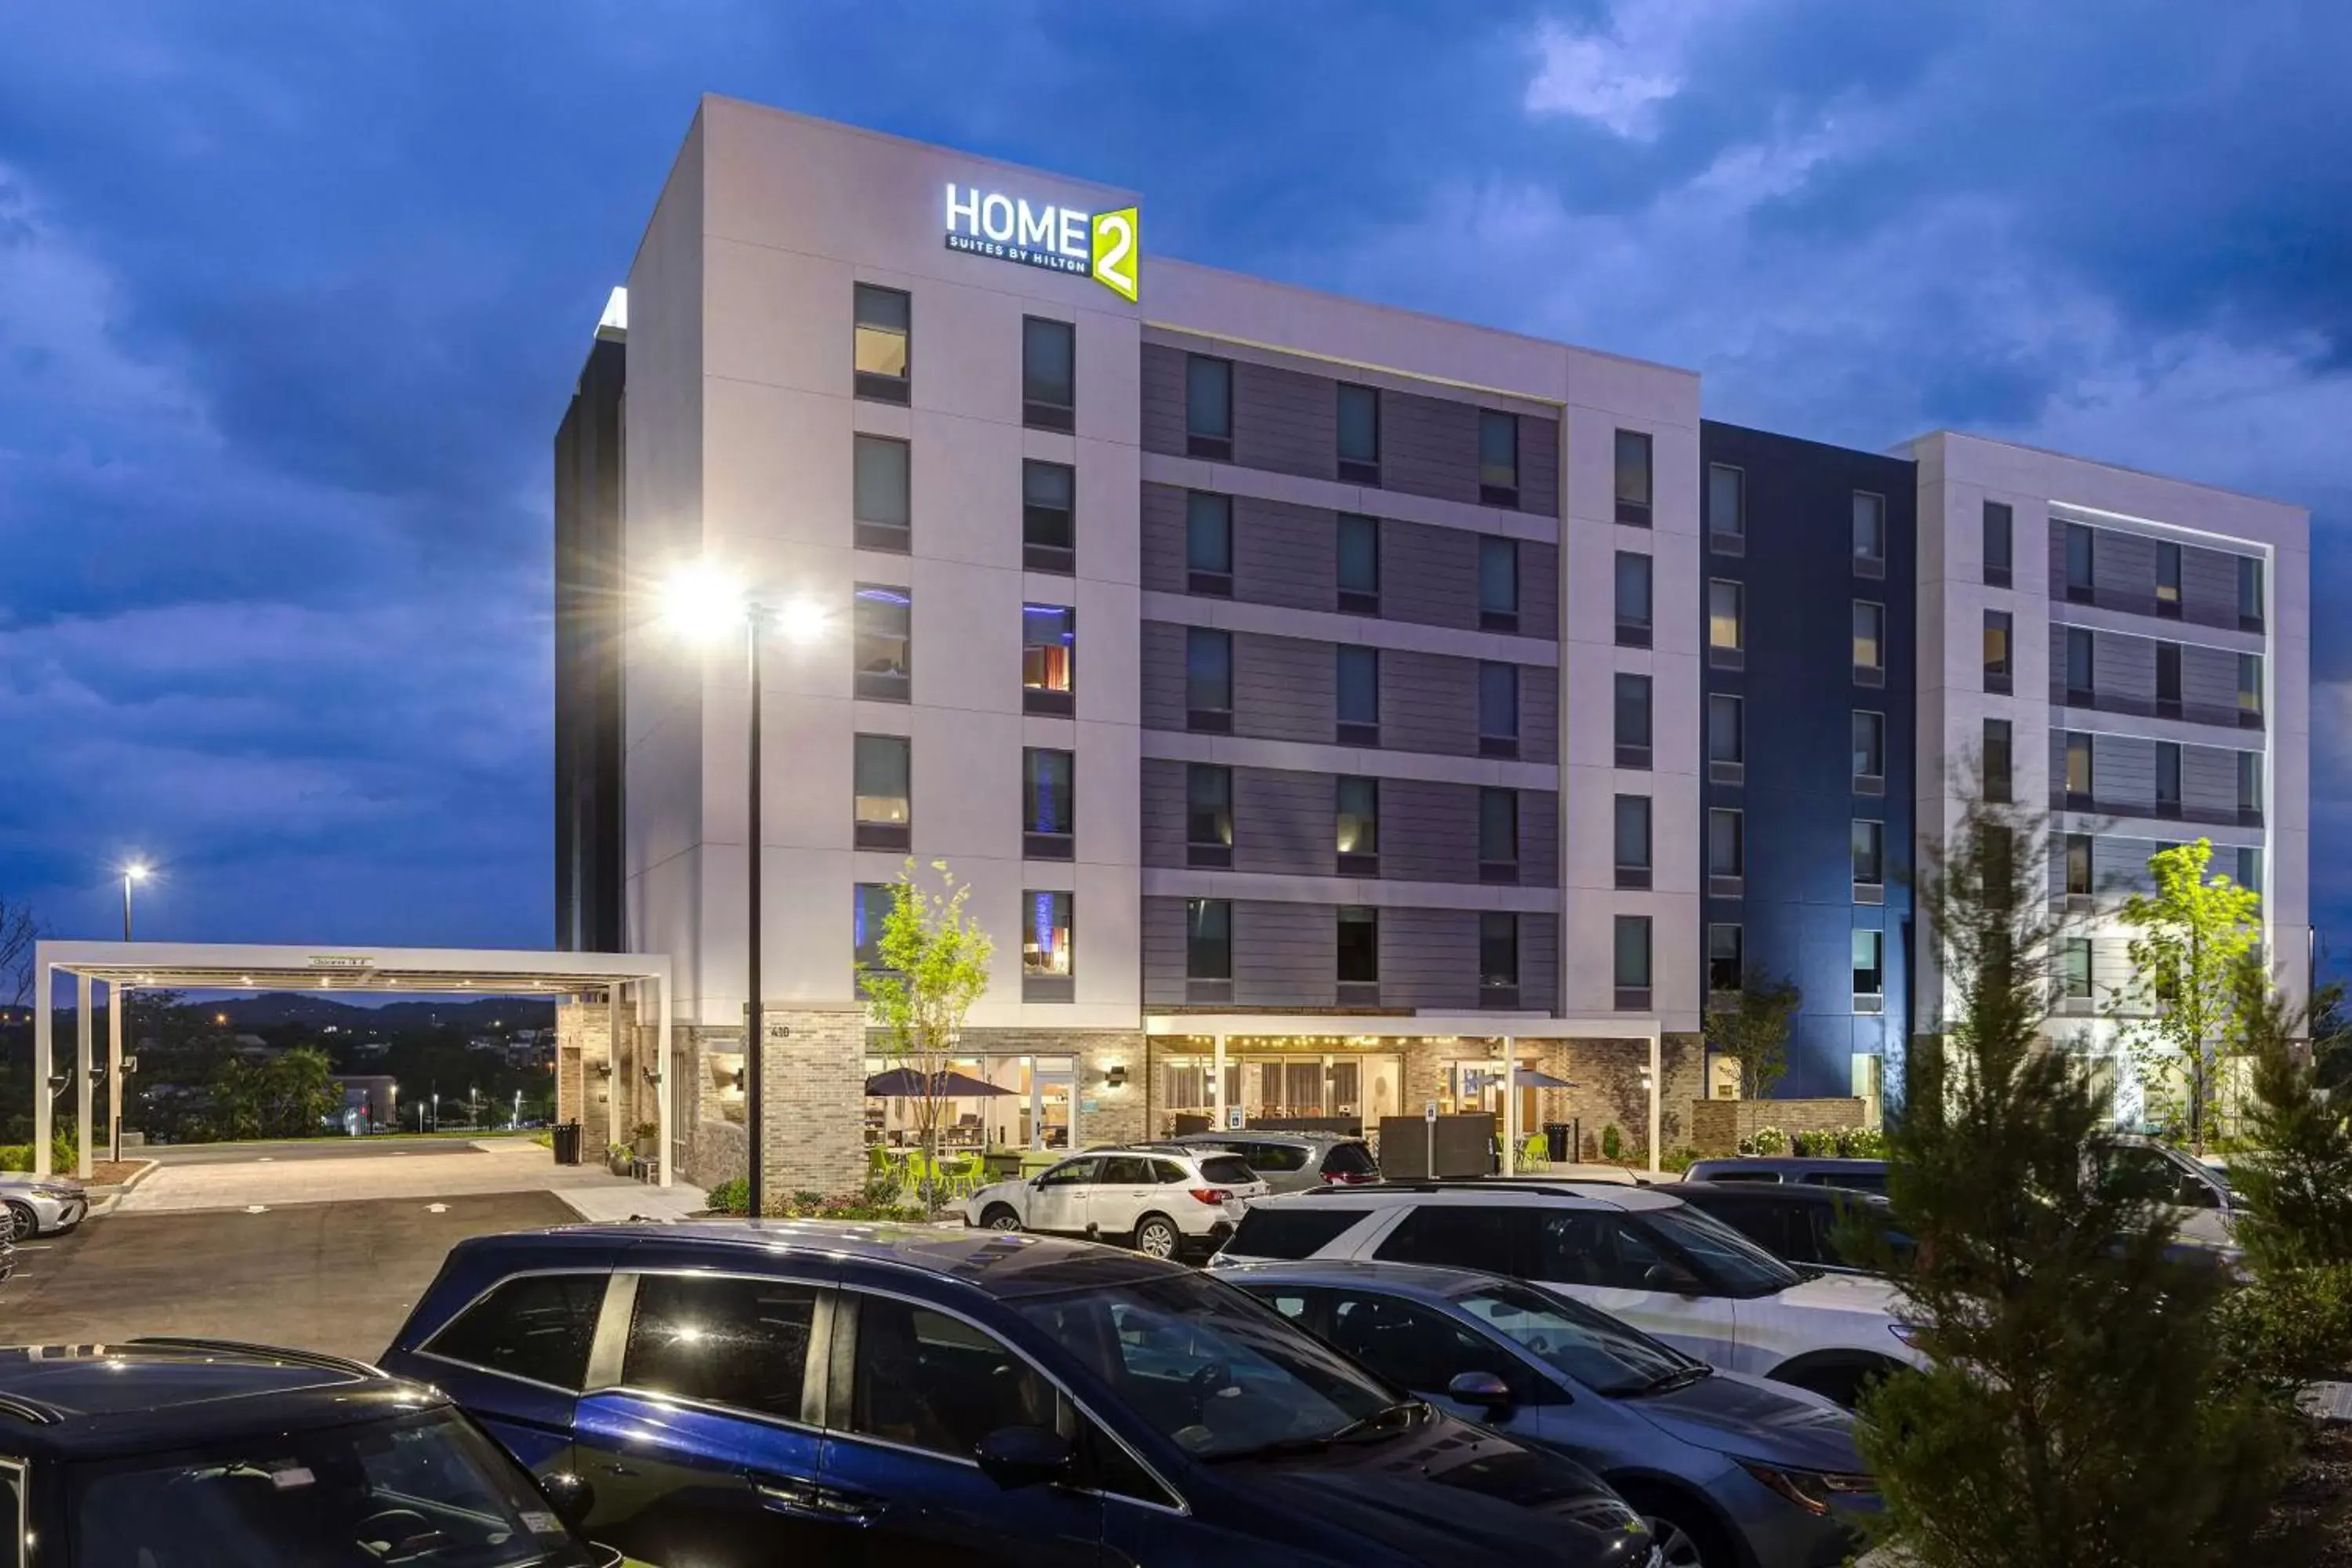 Property Building in Home2 Suites By Hilton Nashville Downtown-Metrocenter